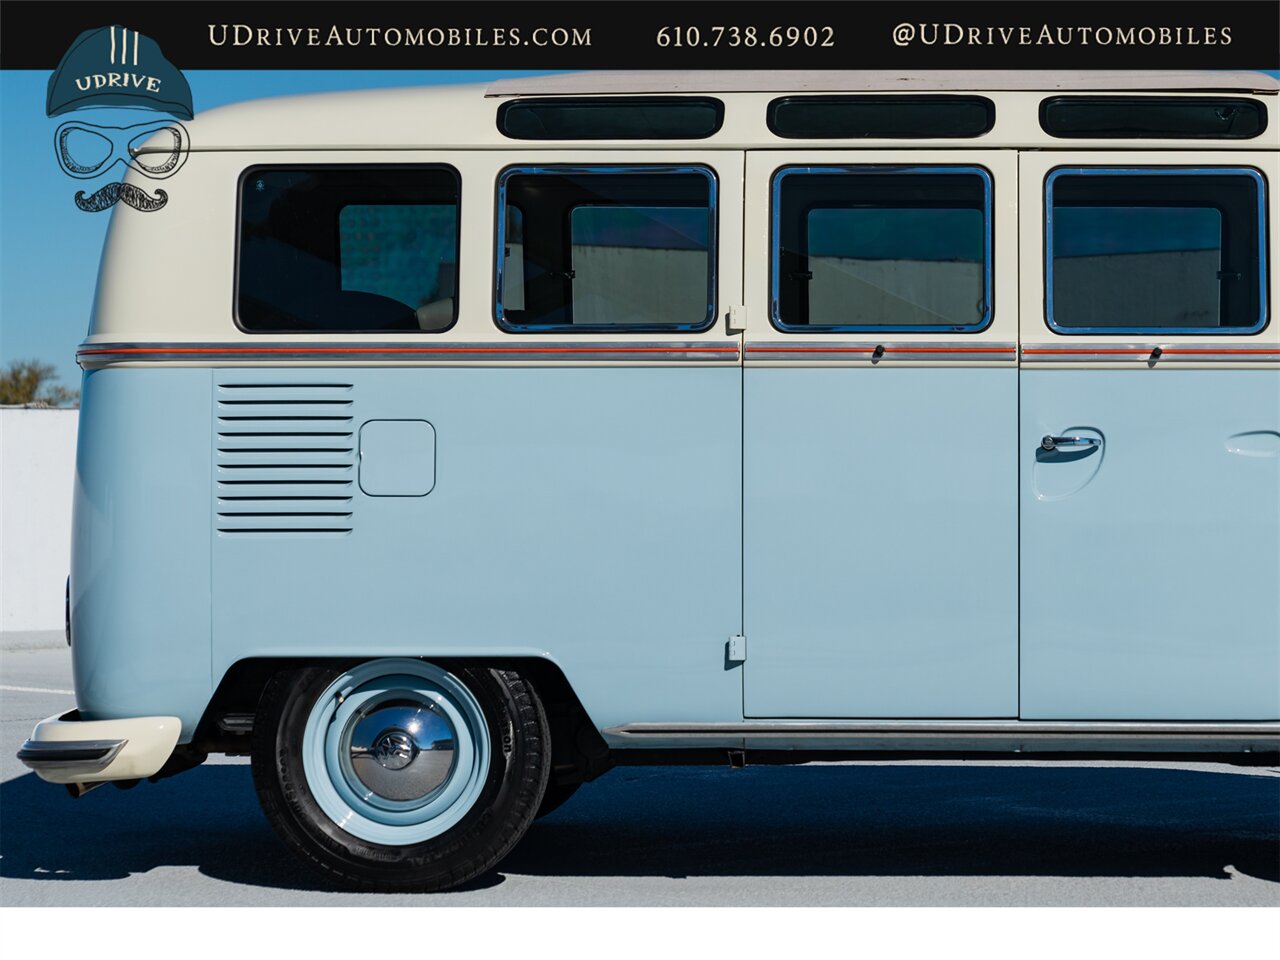 1965 Volkswagen Bus/Vanagon 21 Window Deluxe Transporter  Built By East Coast VW Restorations 1914cc A/C - Photo 20 - West Chester, PA 19382